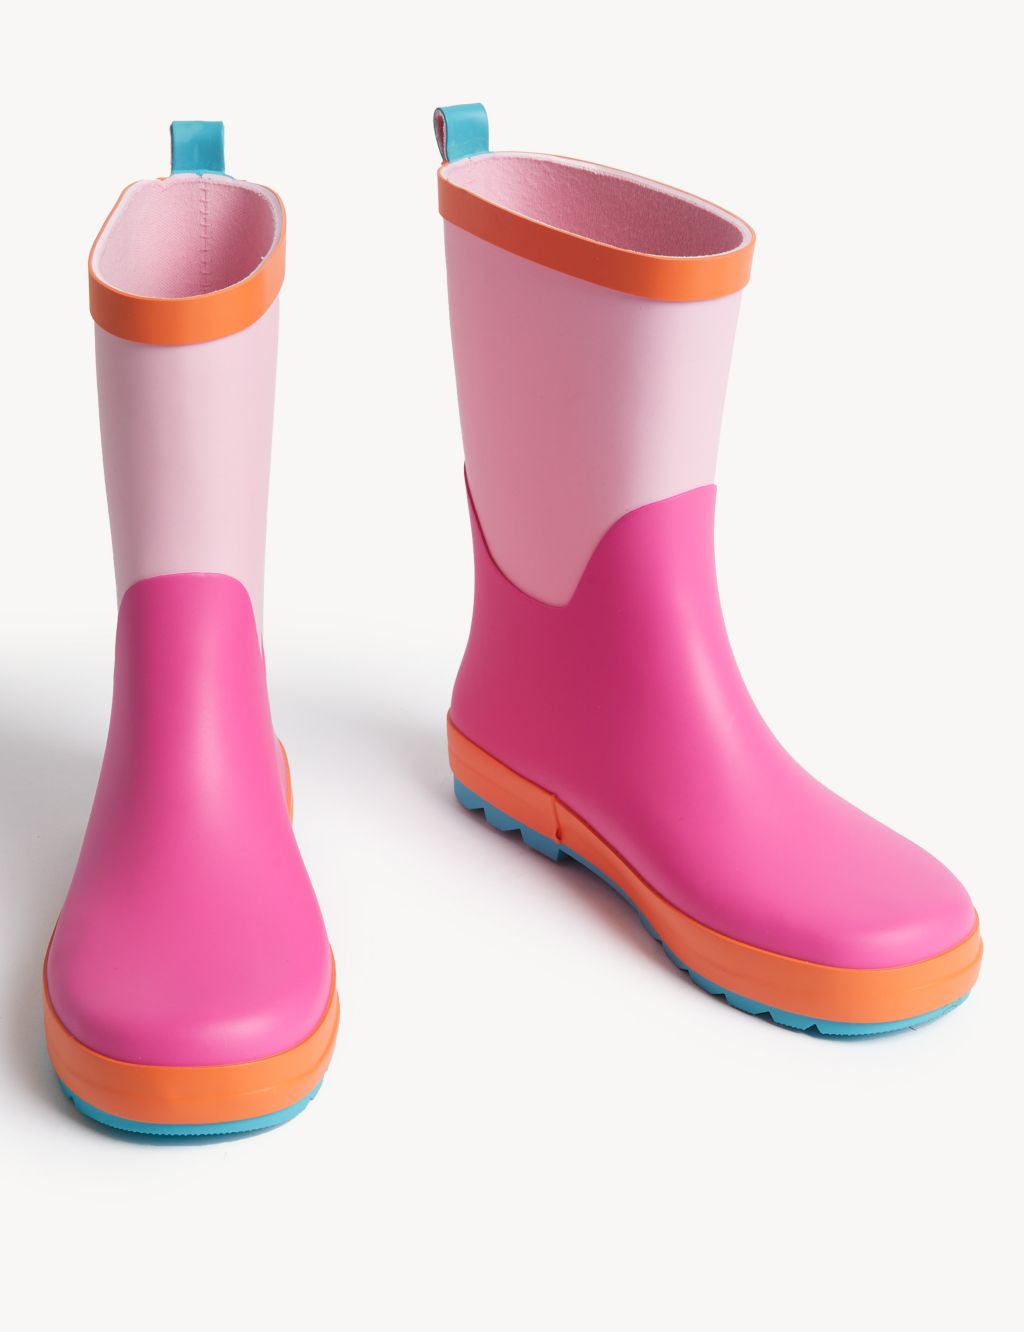 Kids' Colour Block Wellies (4 Small - 6 Large) image 2